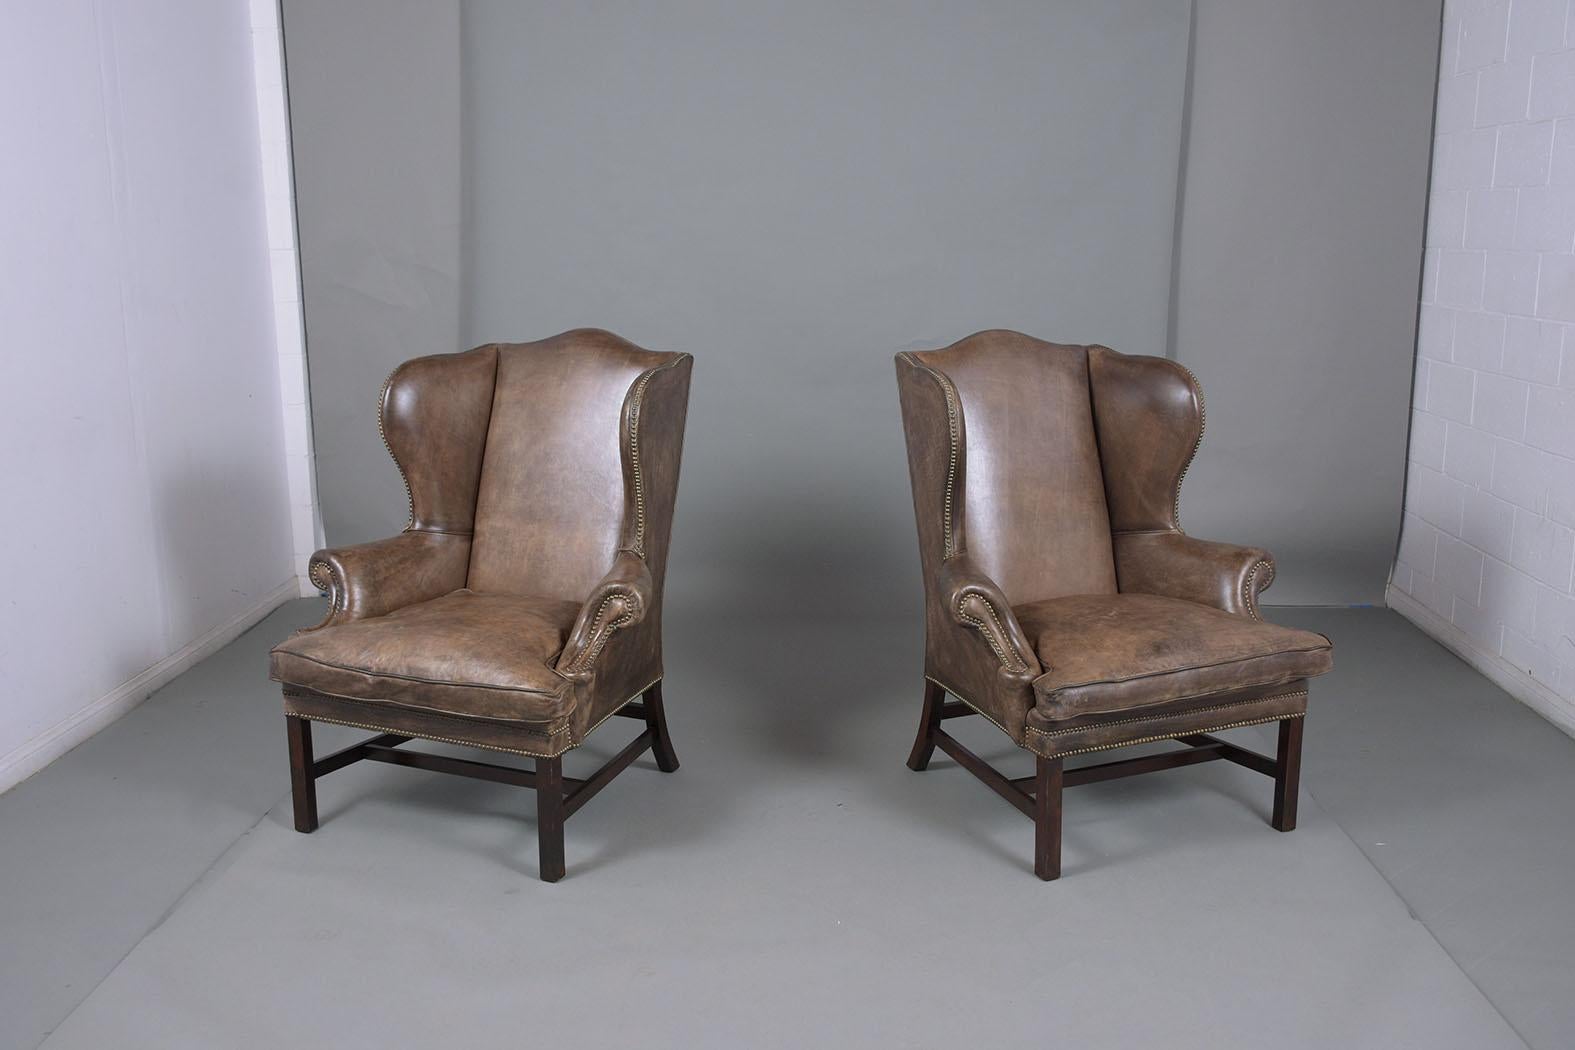 An extraordinary pair of Ralph Lauren Regency-style chairs excellent crafted out of wood are eye-catching and features an original dyed light brown leather color in a good condition that has been just cleaned and polished developing a beautiful